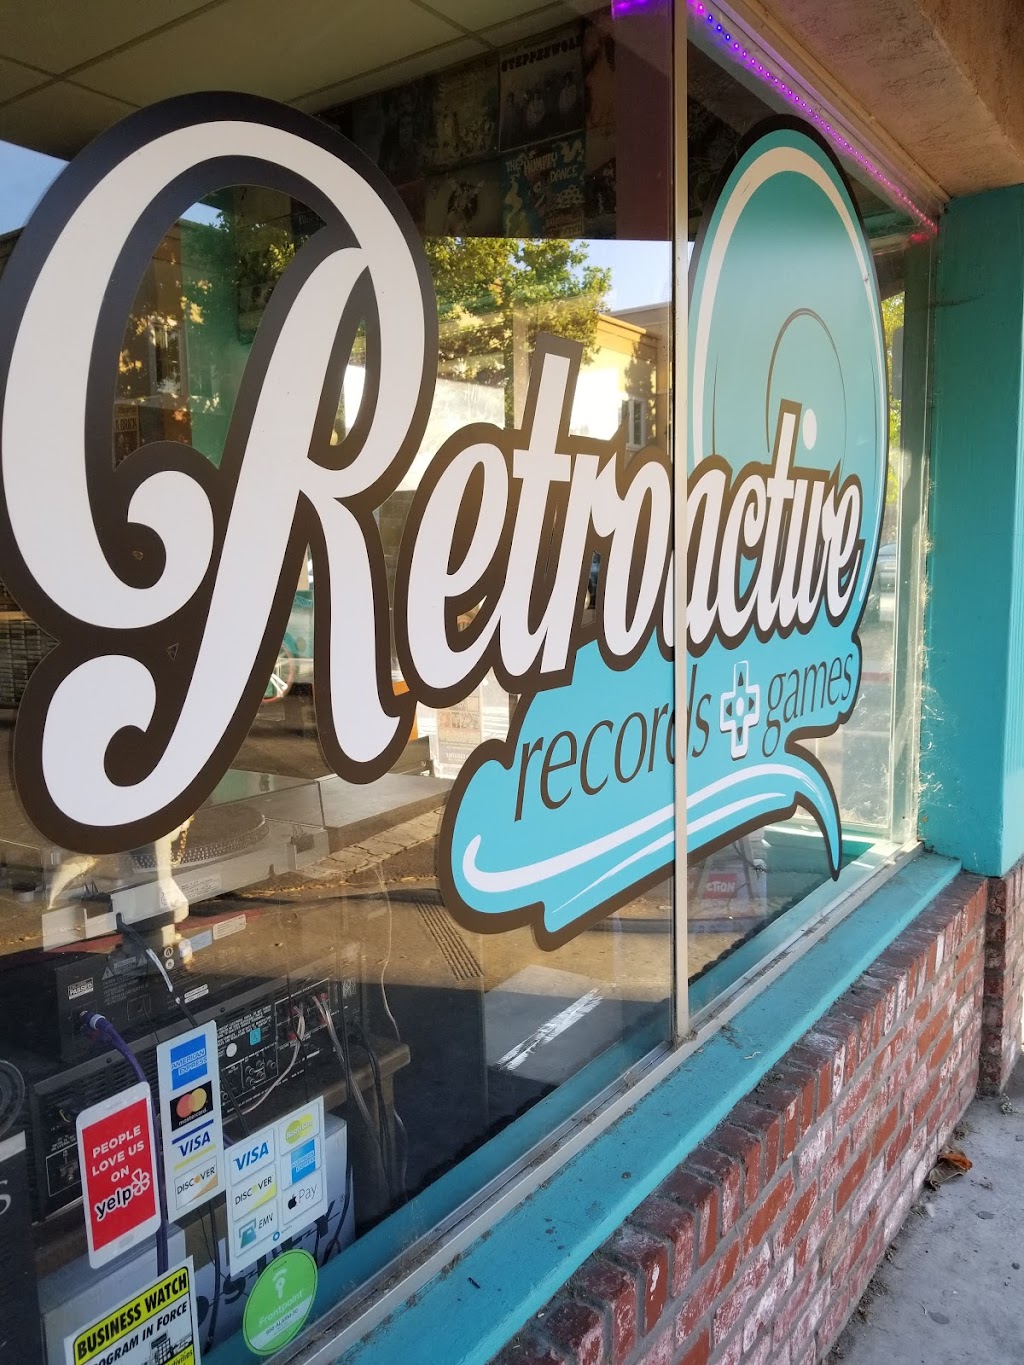 Retroactive Records And Games | 801 Main St, Suisun City, CA 94585 | Phone: (707) 429-9011